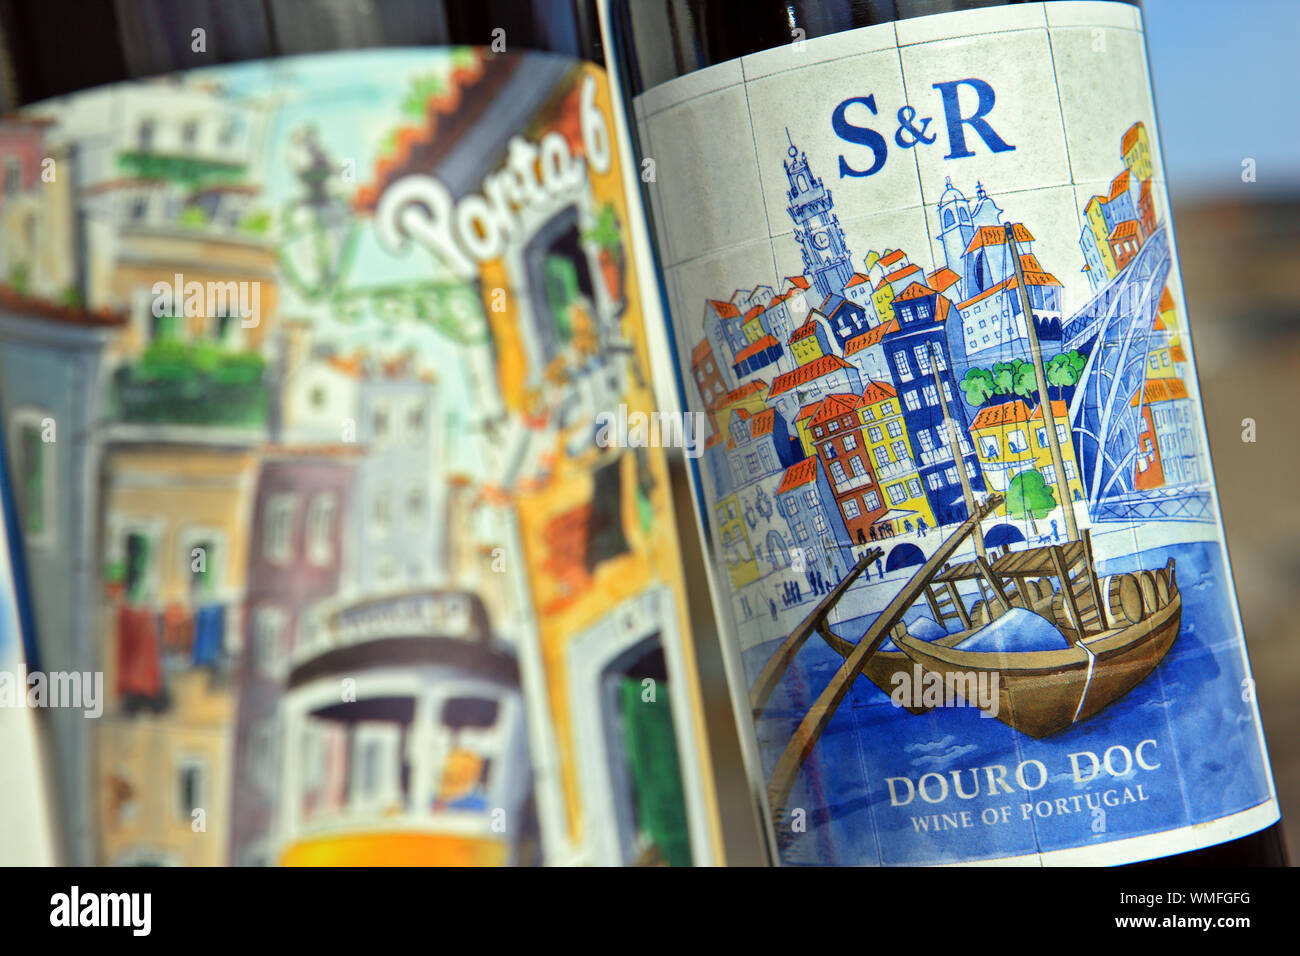 Portuguese wine bottles with colourful labels Stock Photo